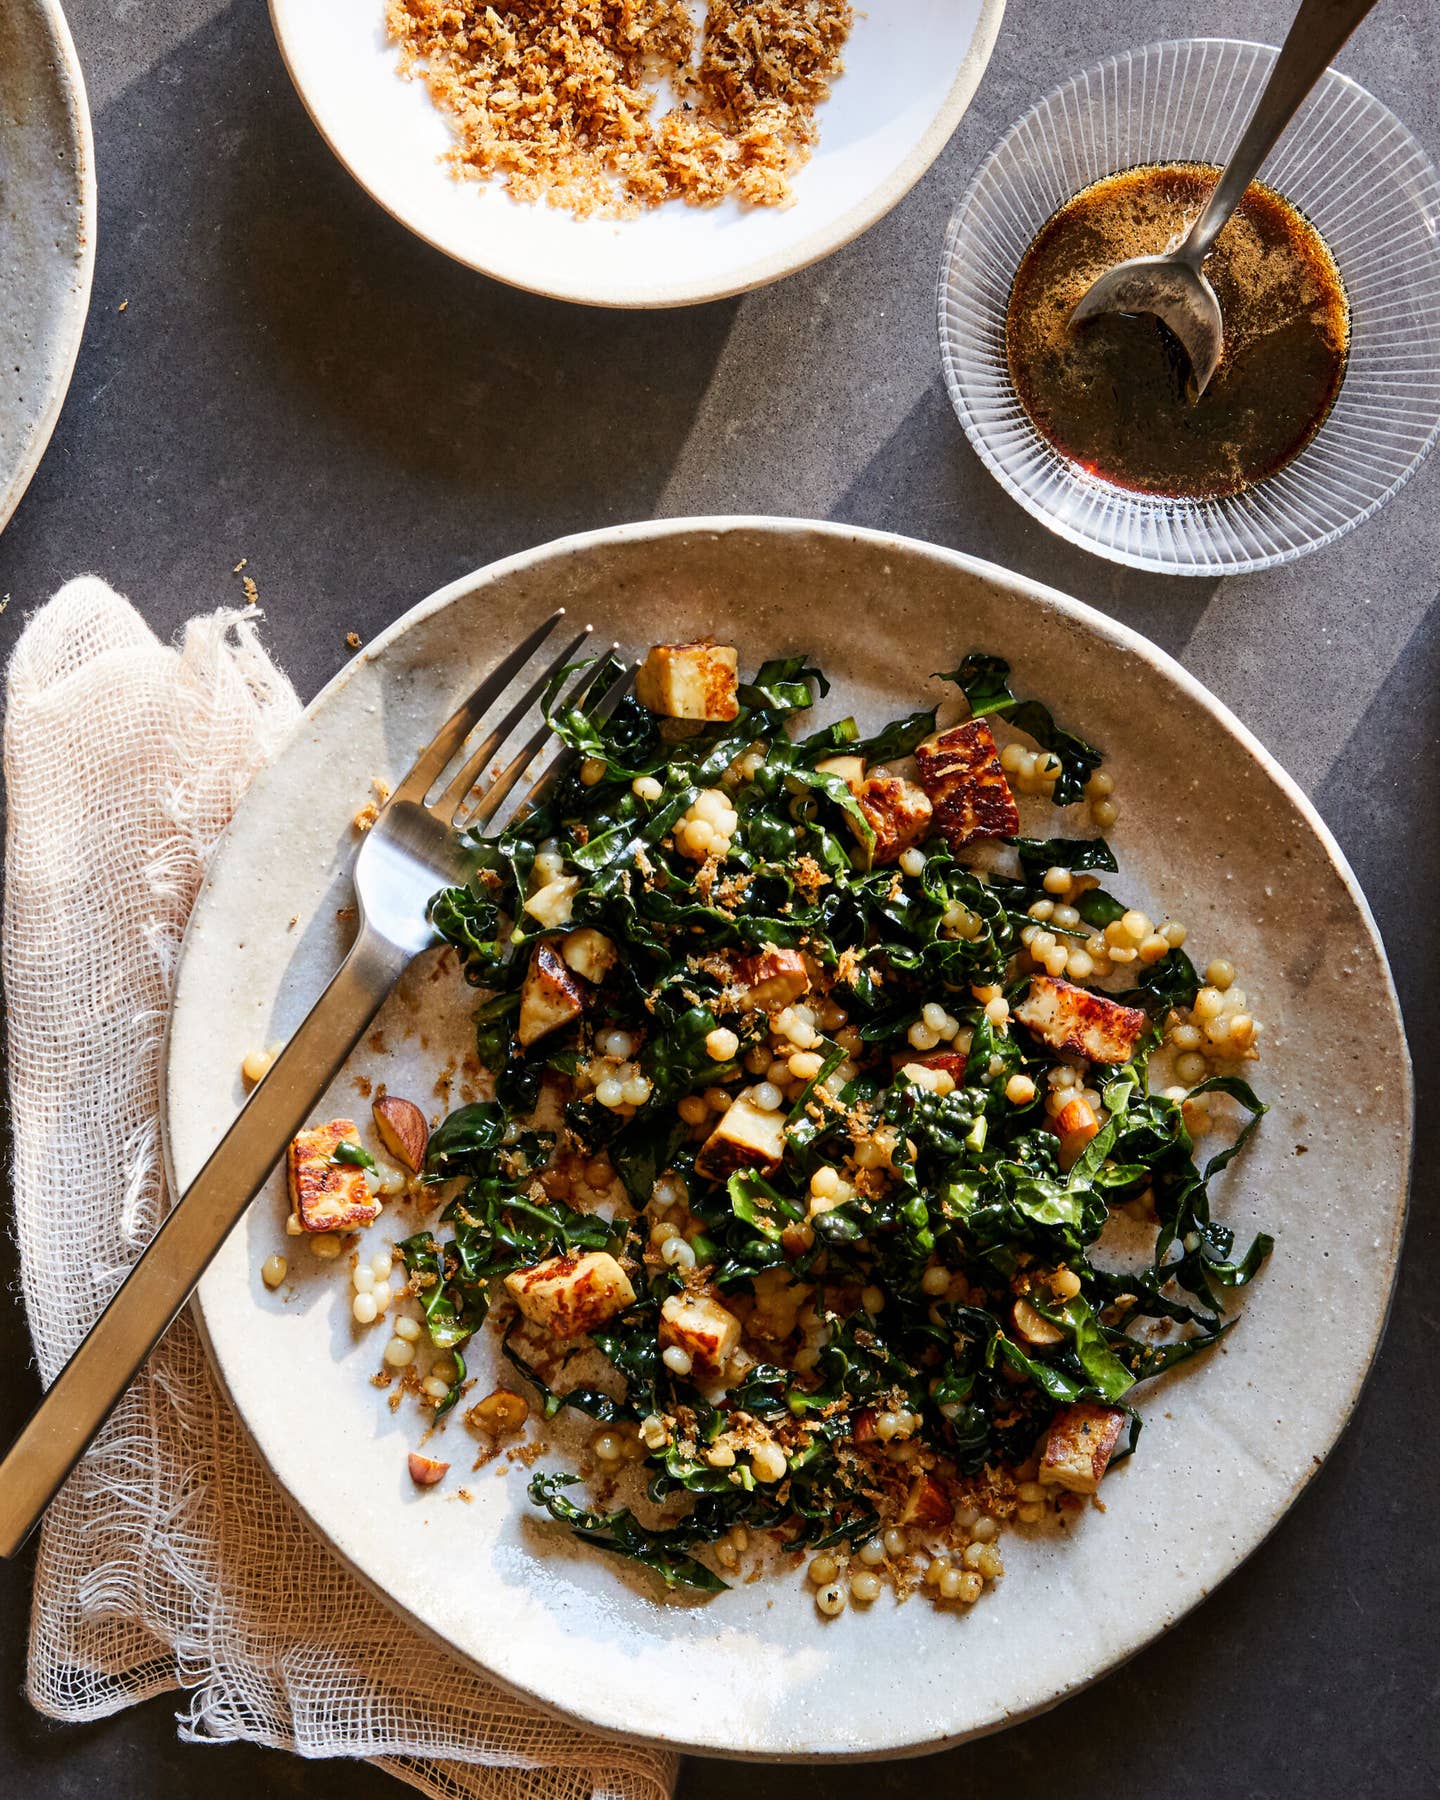 Pearled Couscous Salad with Kale, Halloumi, and Za’atar.